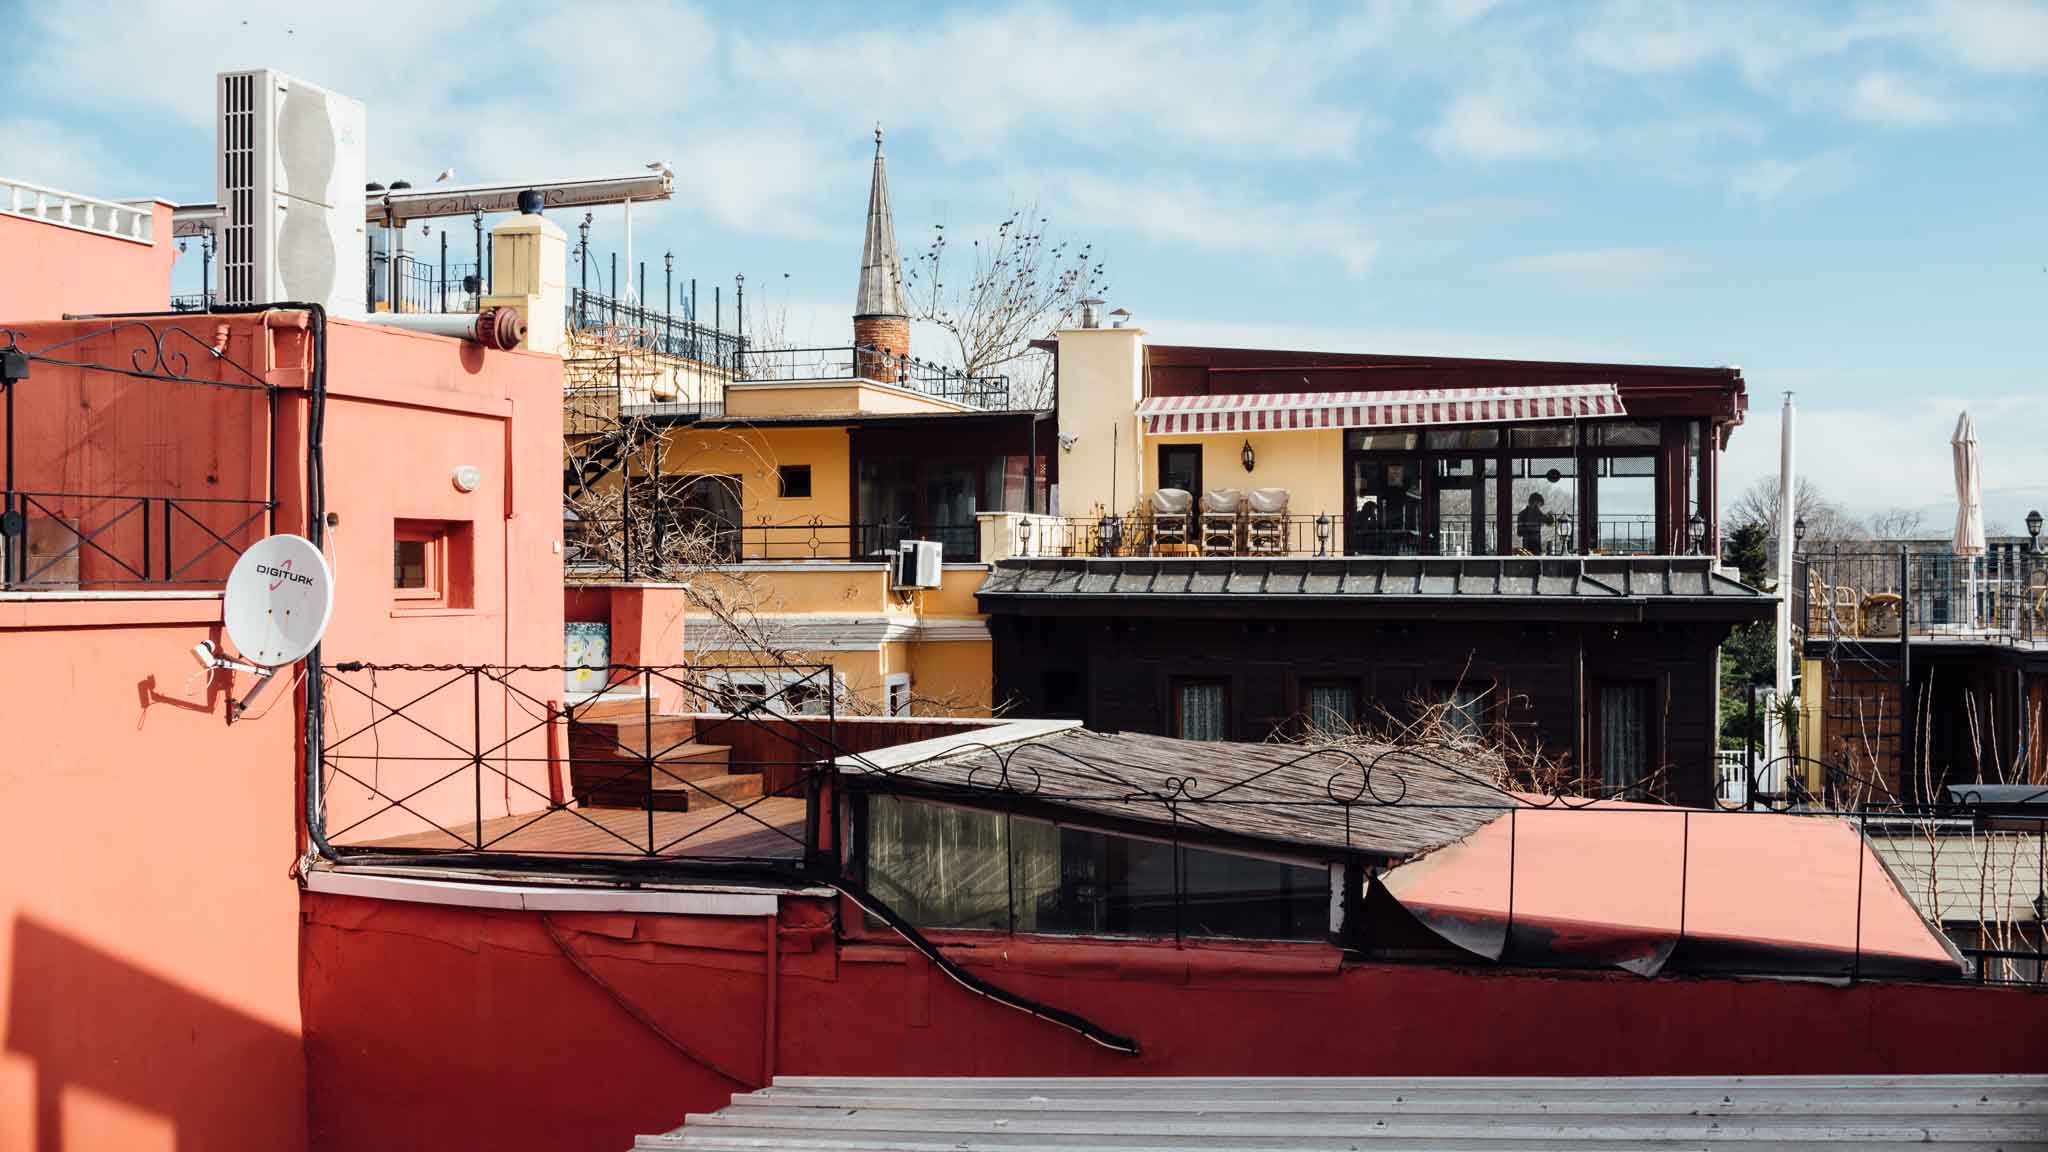 A salmon pink building and other rooftops in Istanbul, Turkey. Travel photography by Paige Gribb